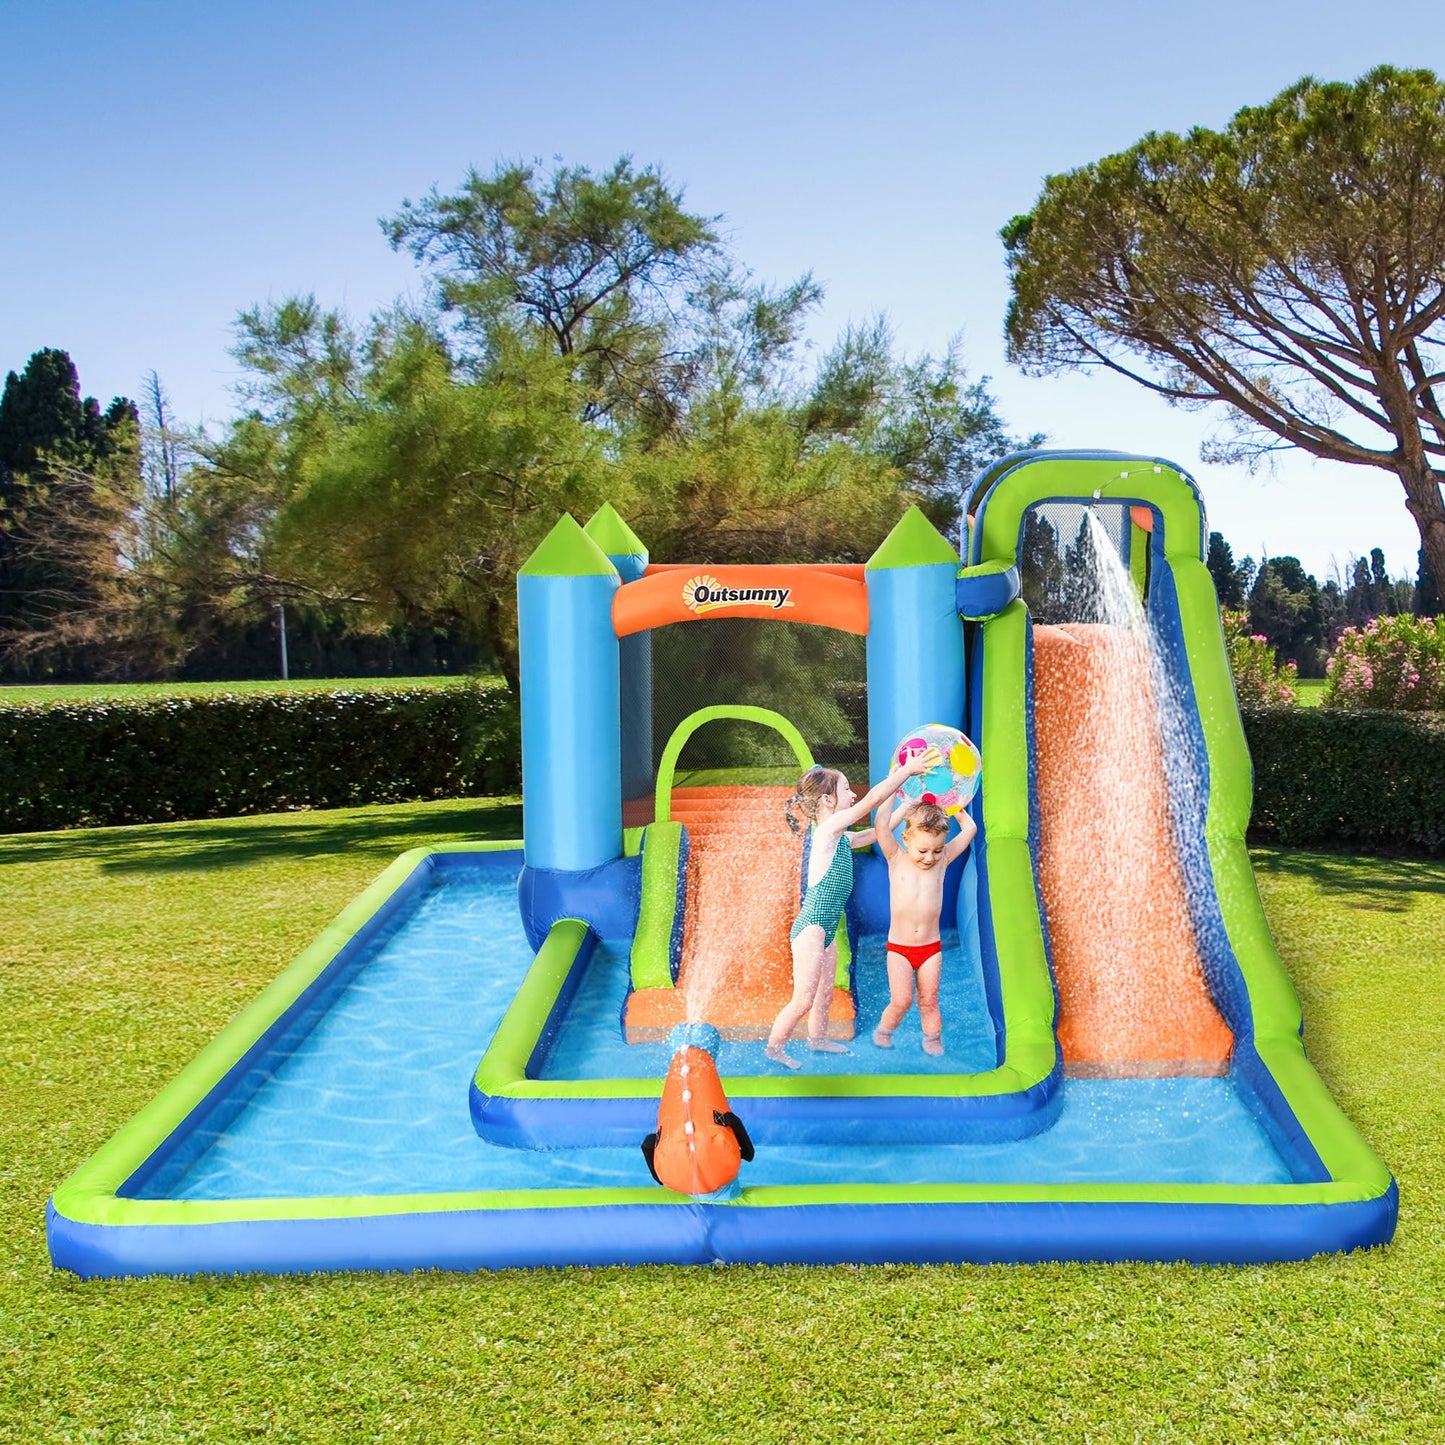 Outdoor and Garden-5 in 1 Kids Bounce House with 2 Slides Pool Trampoline Climbing Wall Water Cannon, Outdoor Indoor Inflatable Water Slide, for 3-8 Years Old - Outdoor Style Company